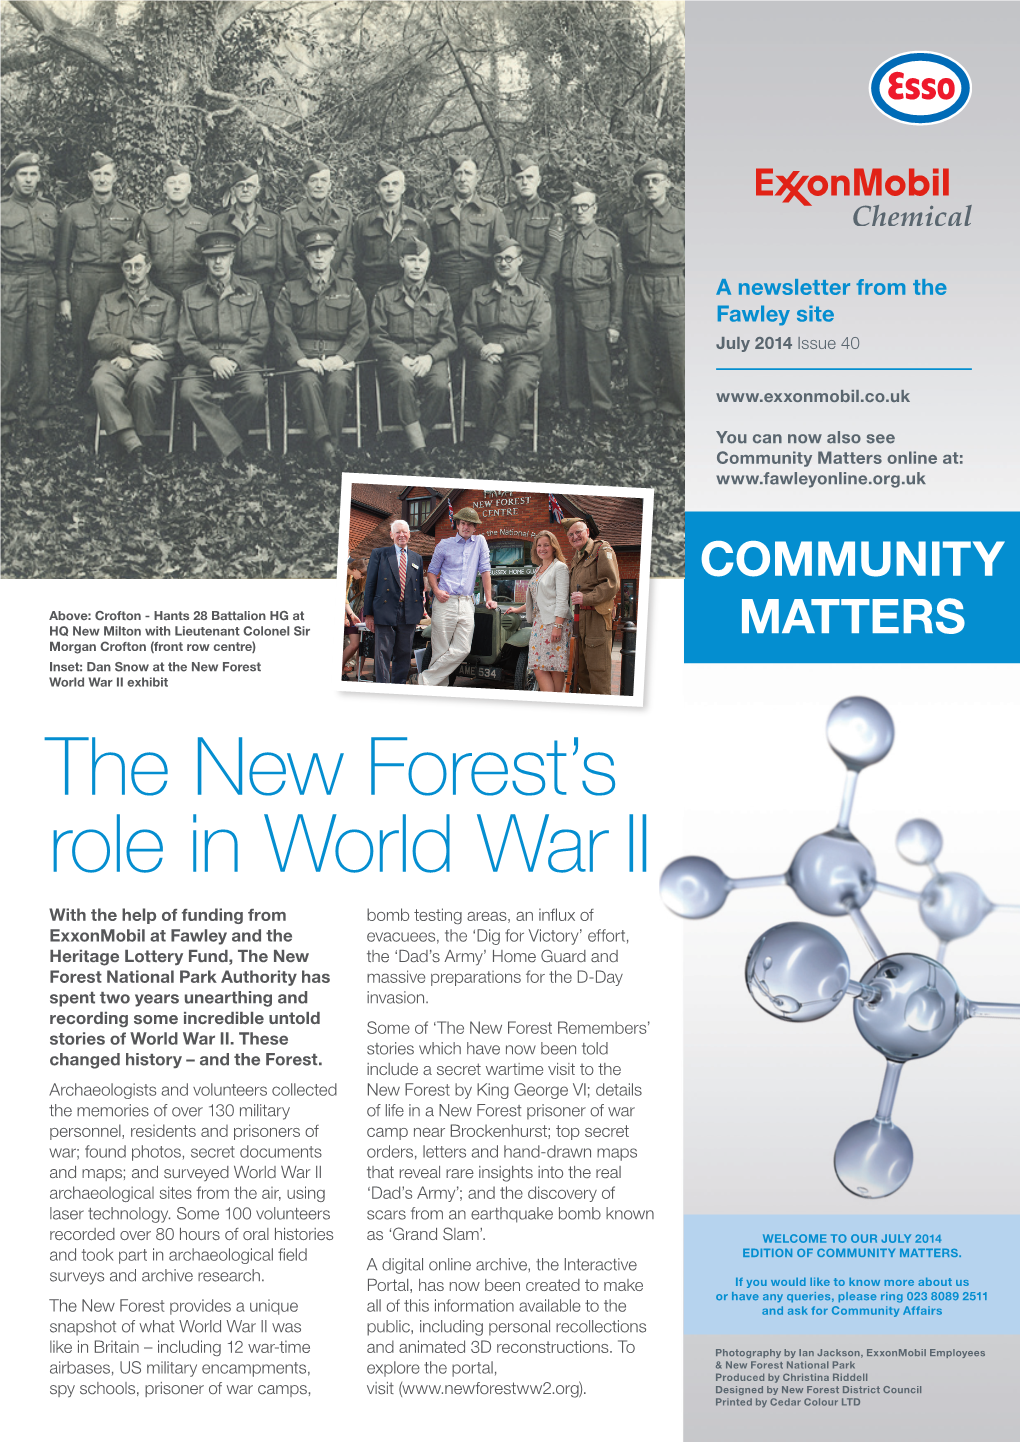 The New Forest's Role in World War II